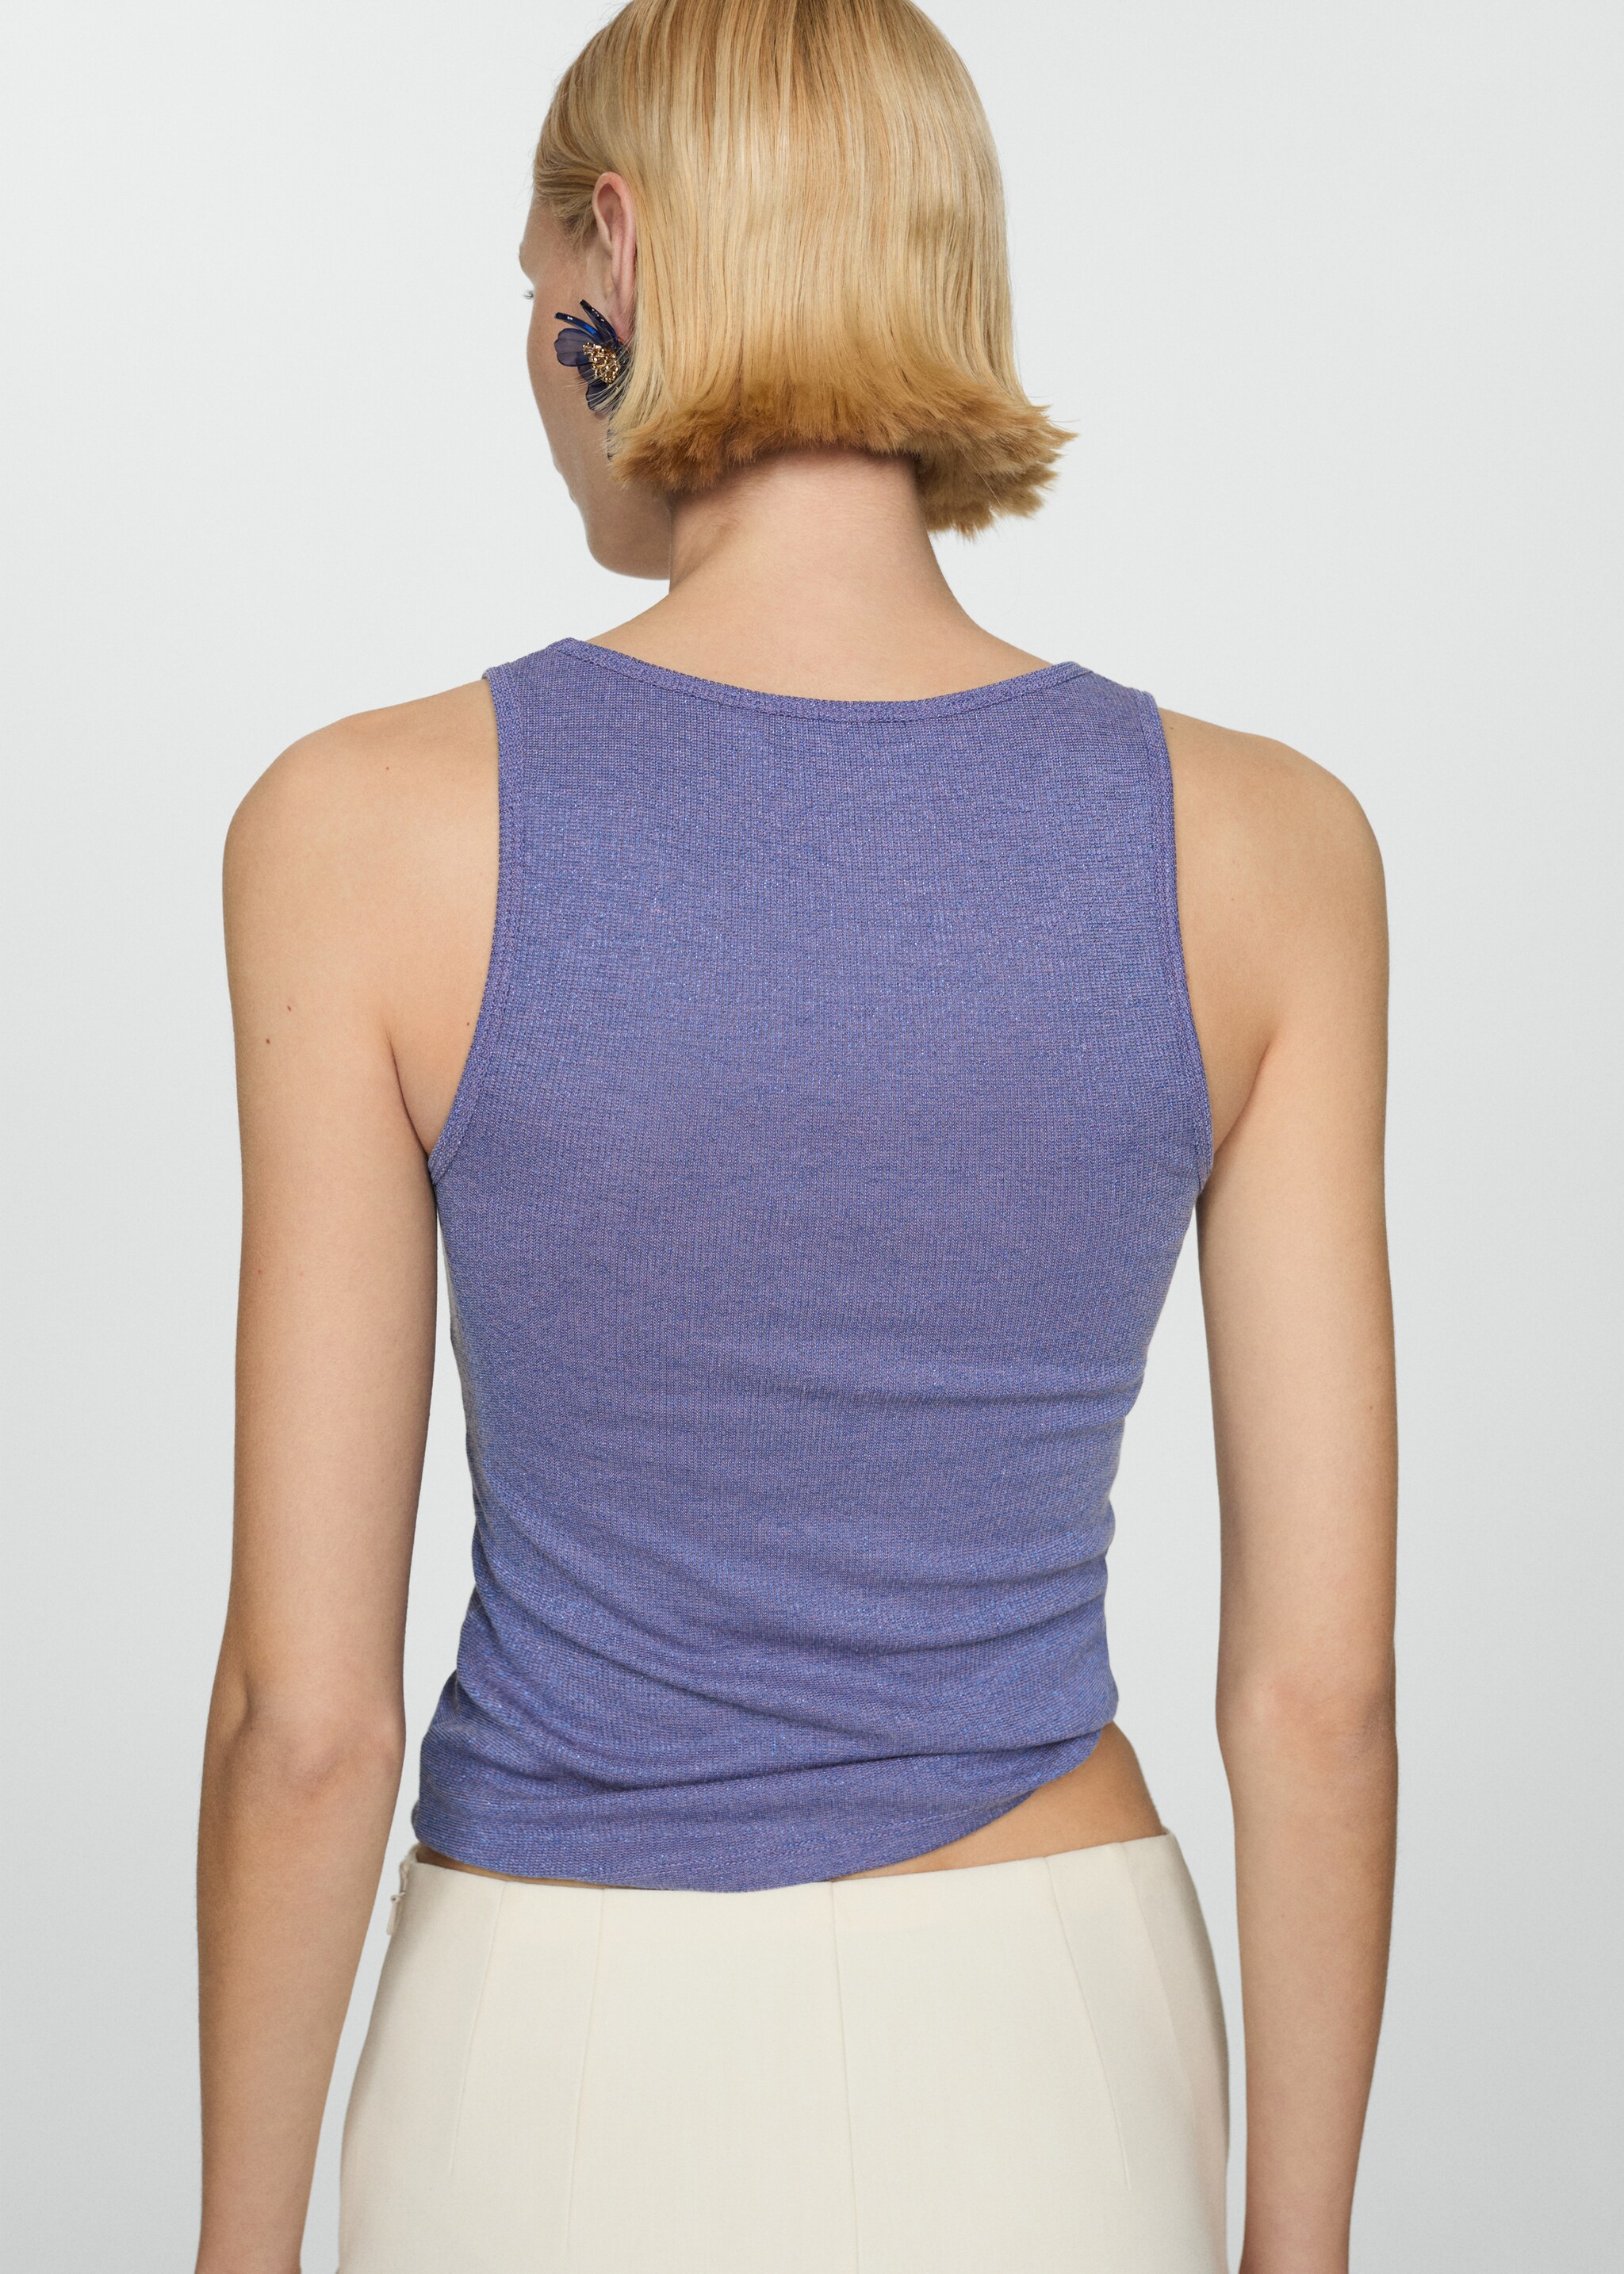 Lurex knitted top - Reverse of the article